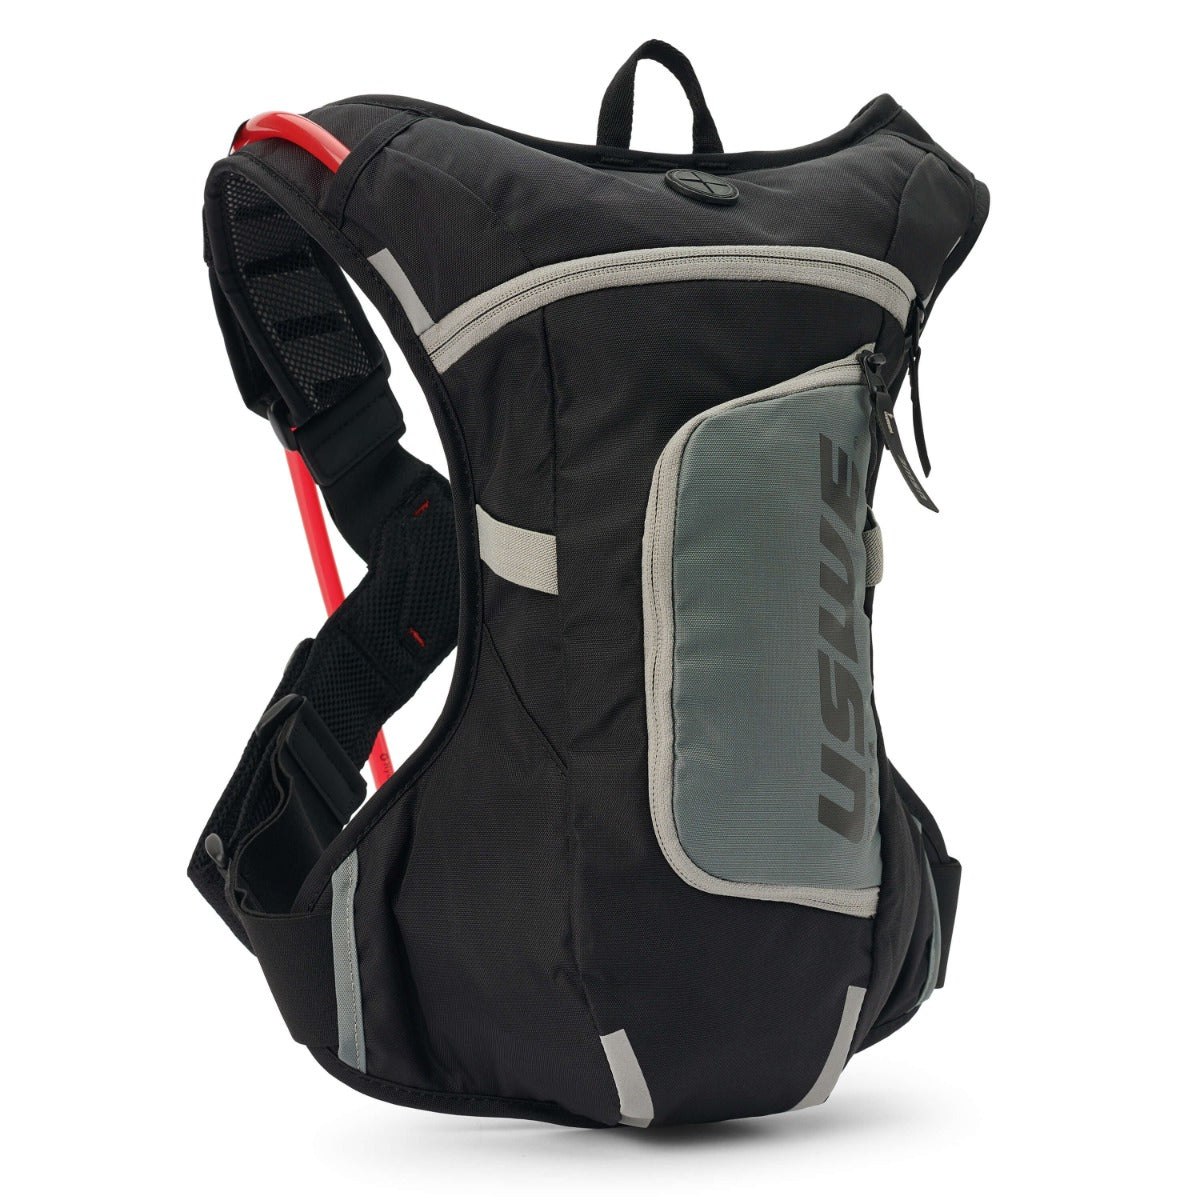 USWE RAW 4 Hydration Backpack Black Grey – With 3 Litre Bladder